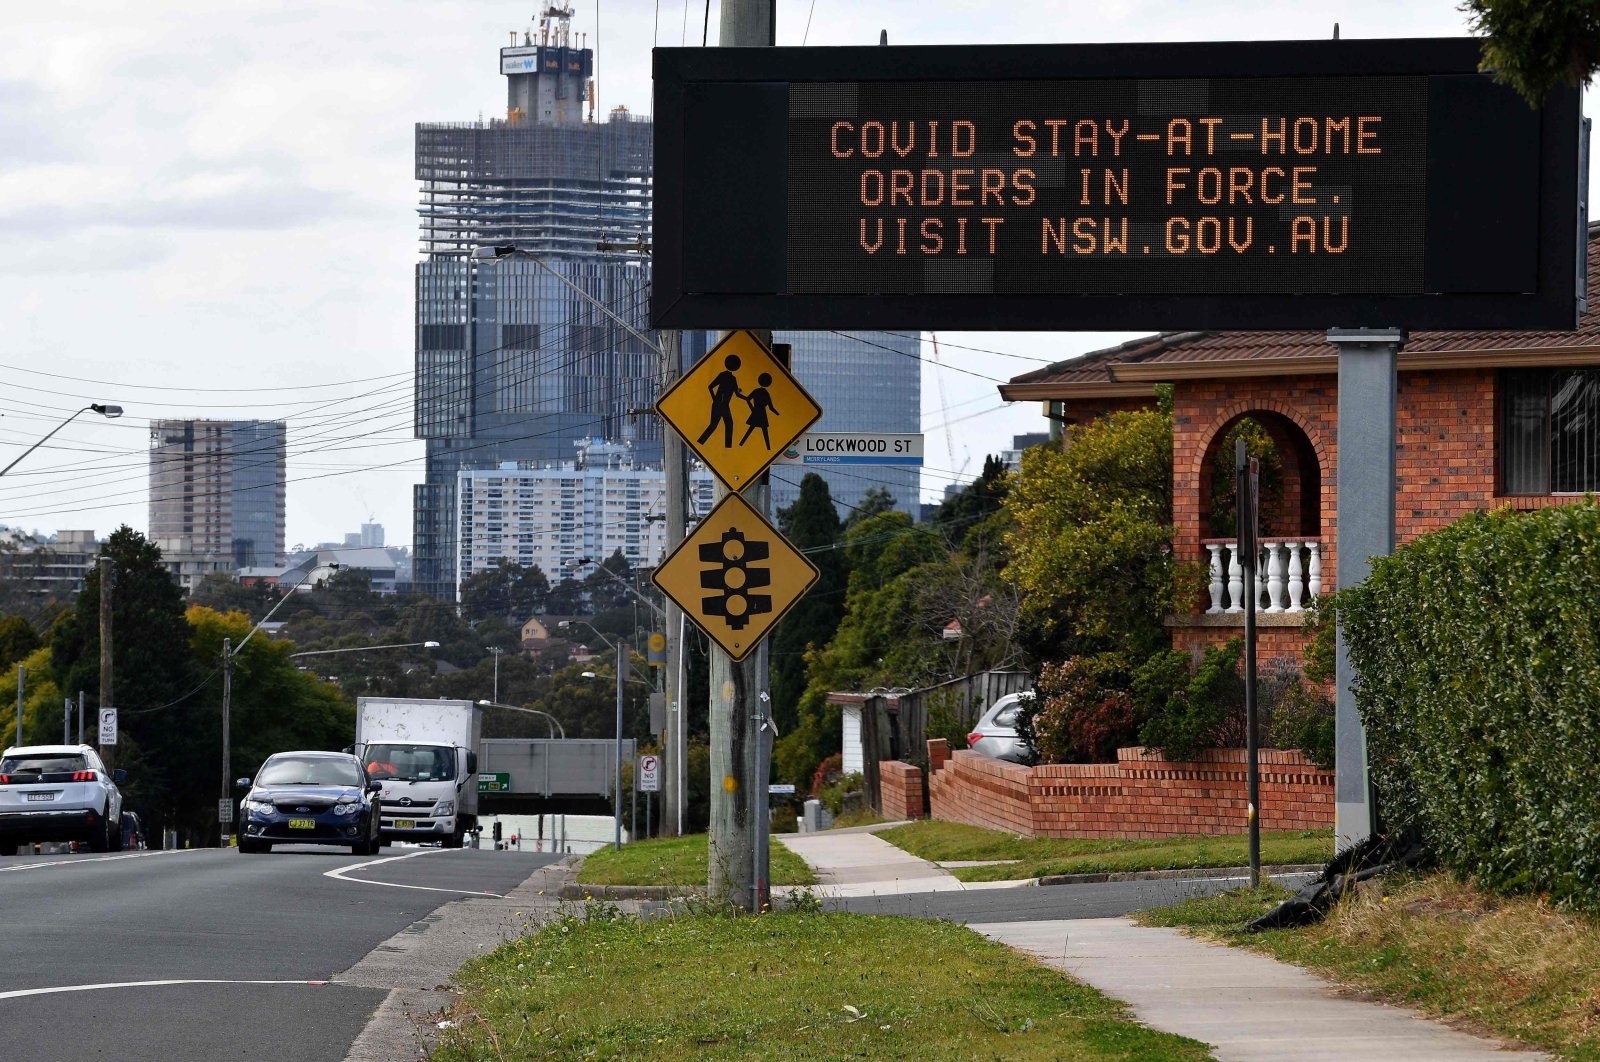 A stay-at-home message is displayed on a screen in western Sydney during the city's prolonged COVID-19 coronavirus lockdown, Sydney, Australia, Aug. 2, 2021. (AFP Photo)